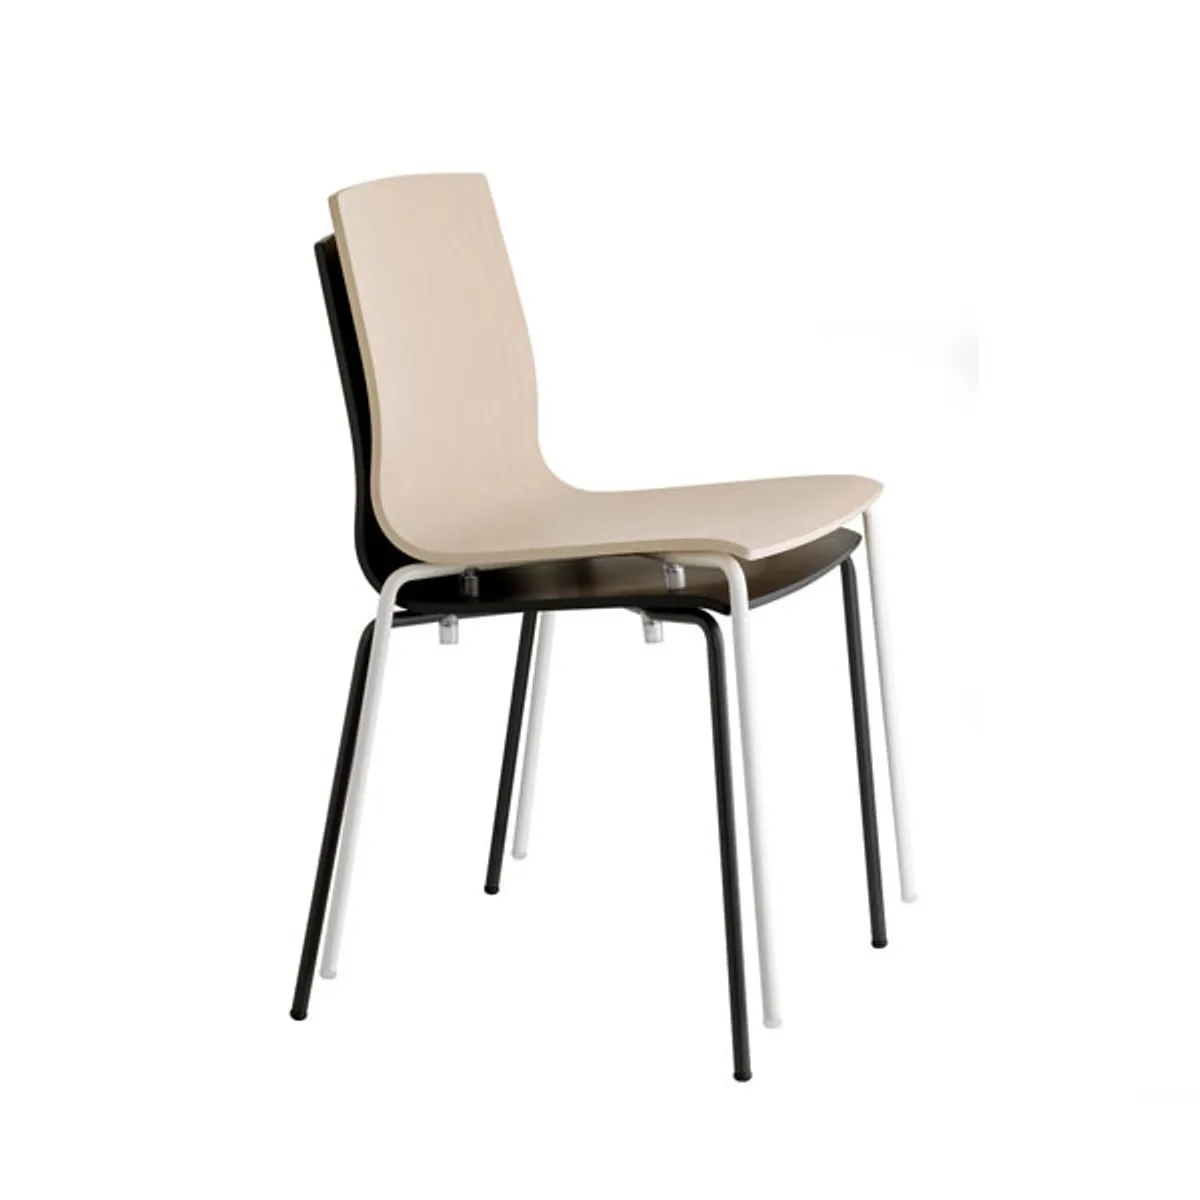 Evie 2 metal side chair 7 Inside Out Contracts